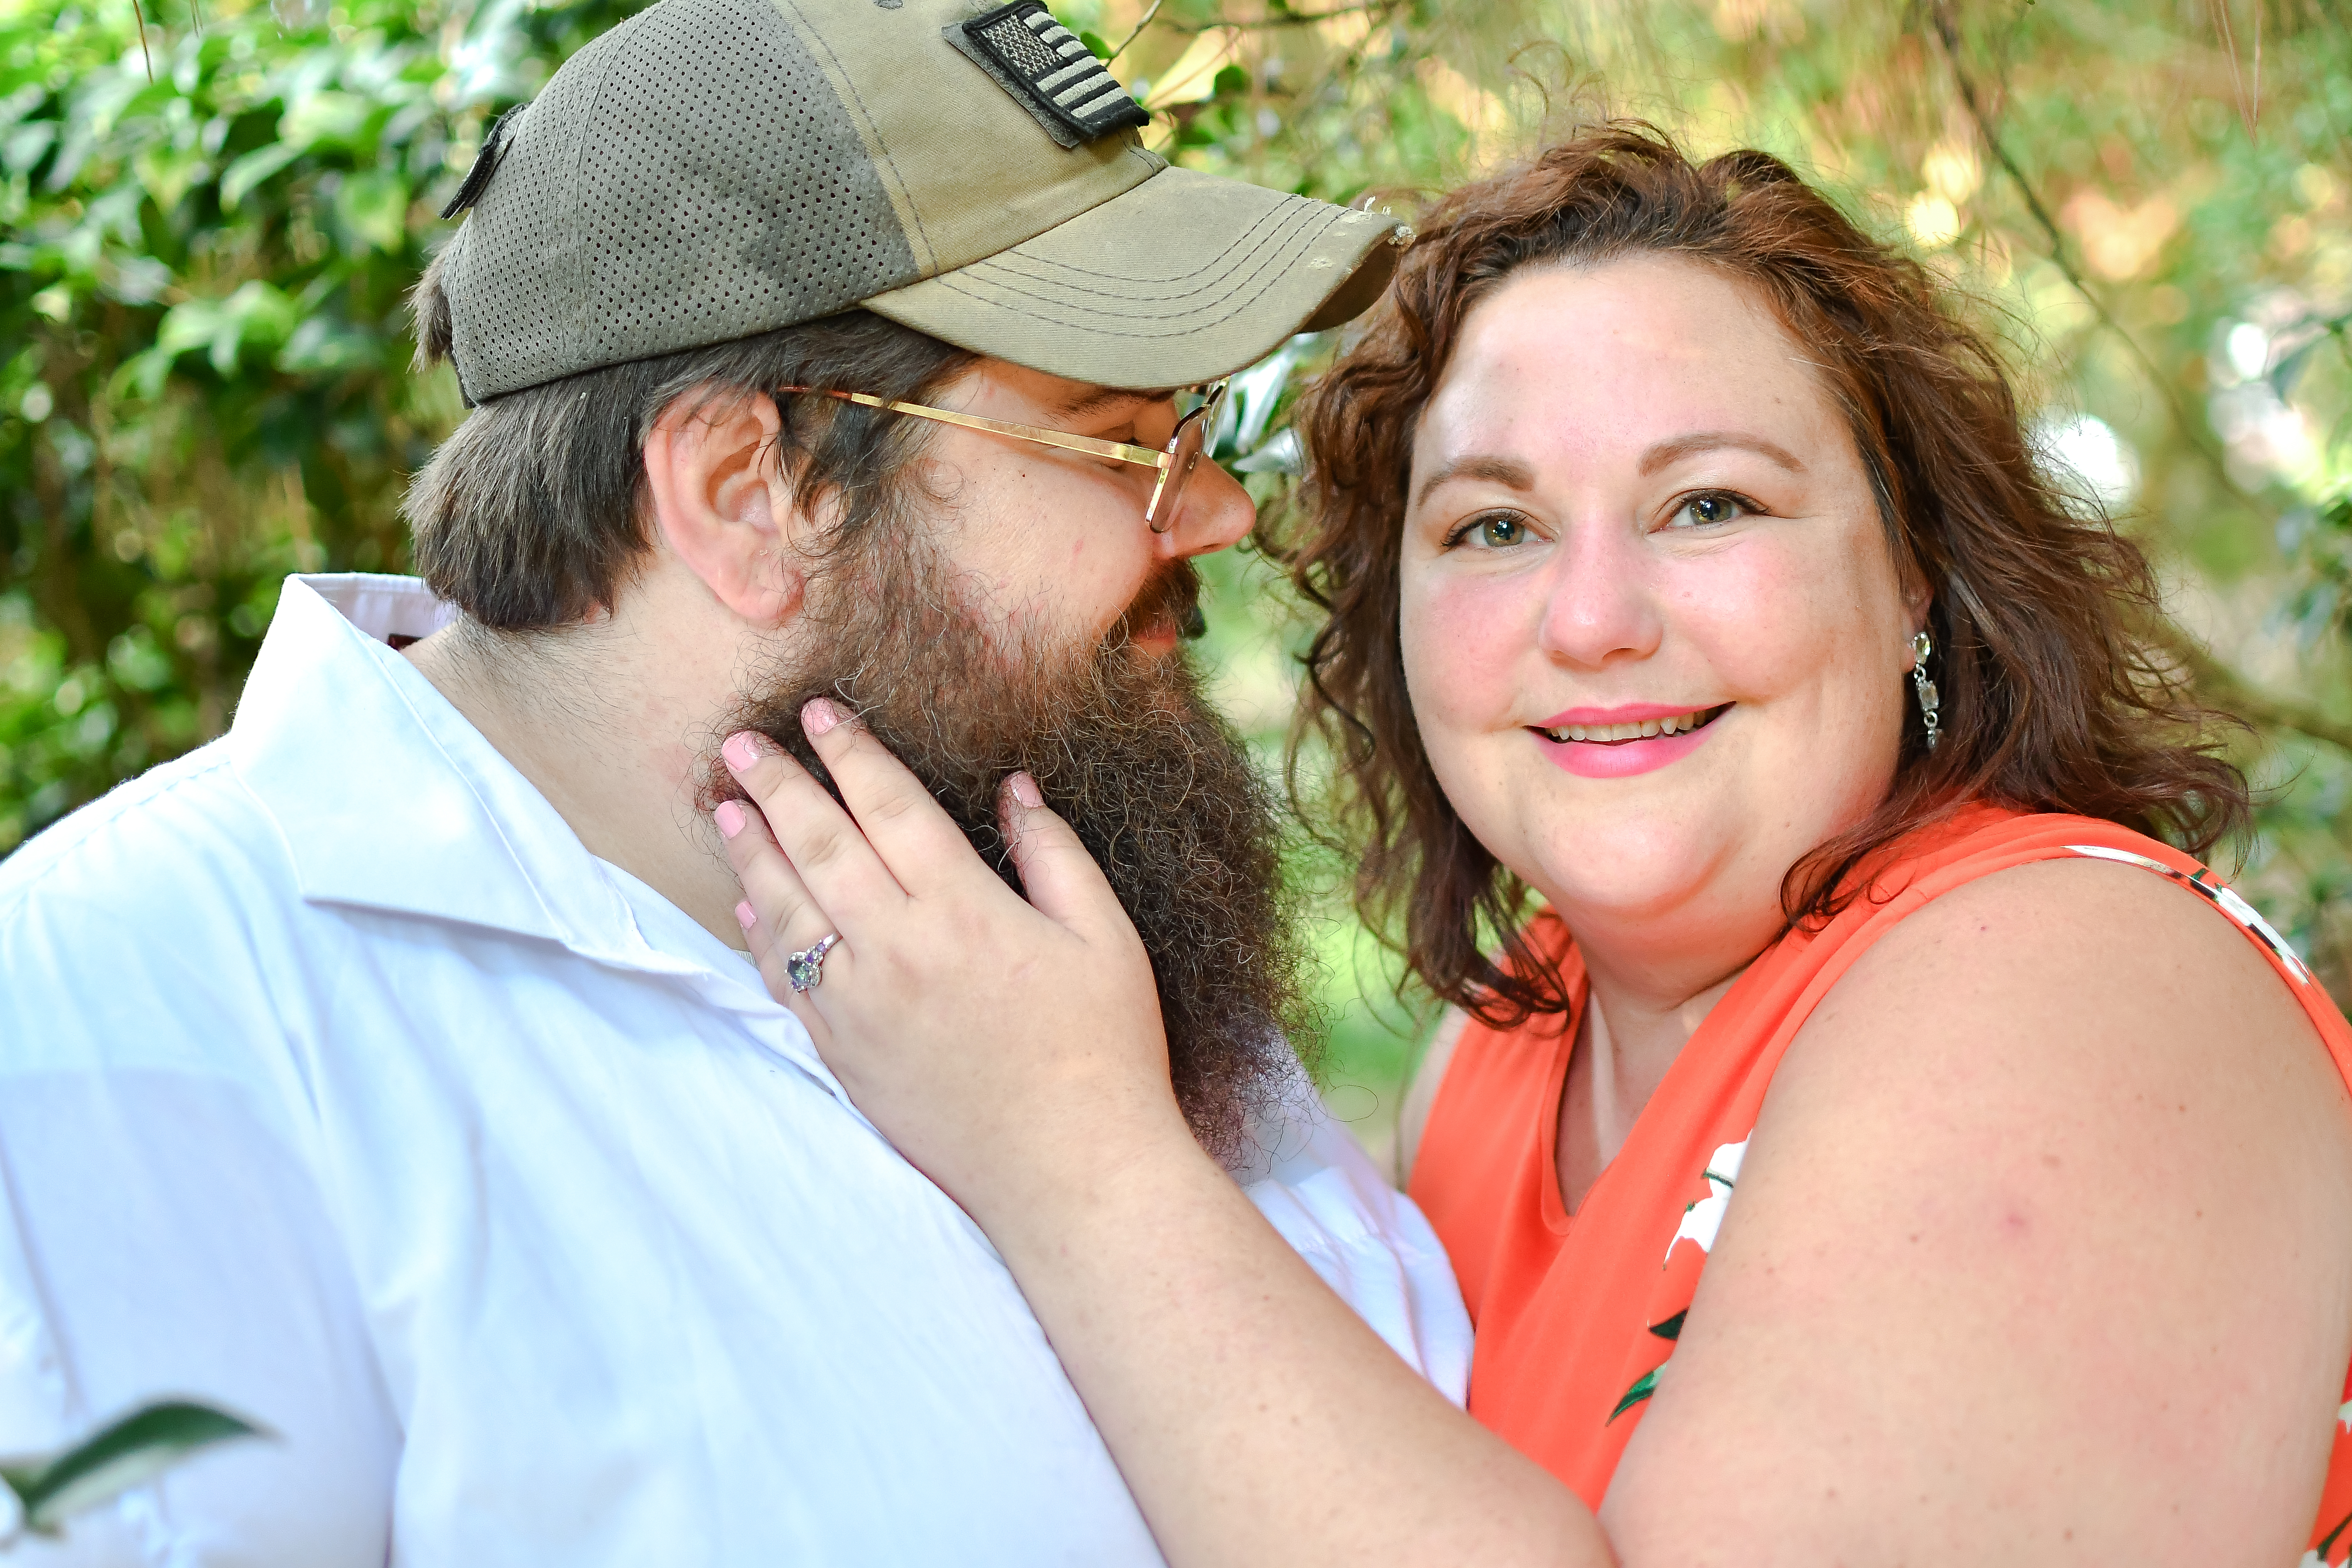 Mitch Broggs and Casae Hobbs Celebrate Marriage This Weekend in Lafayette, LA